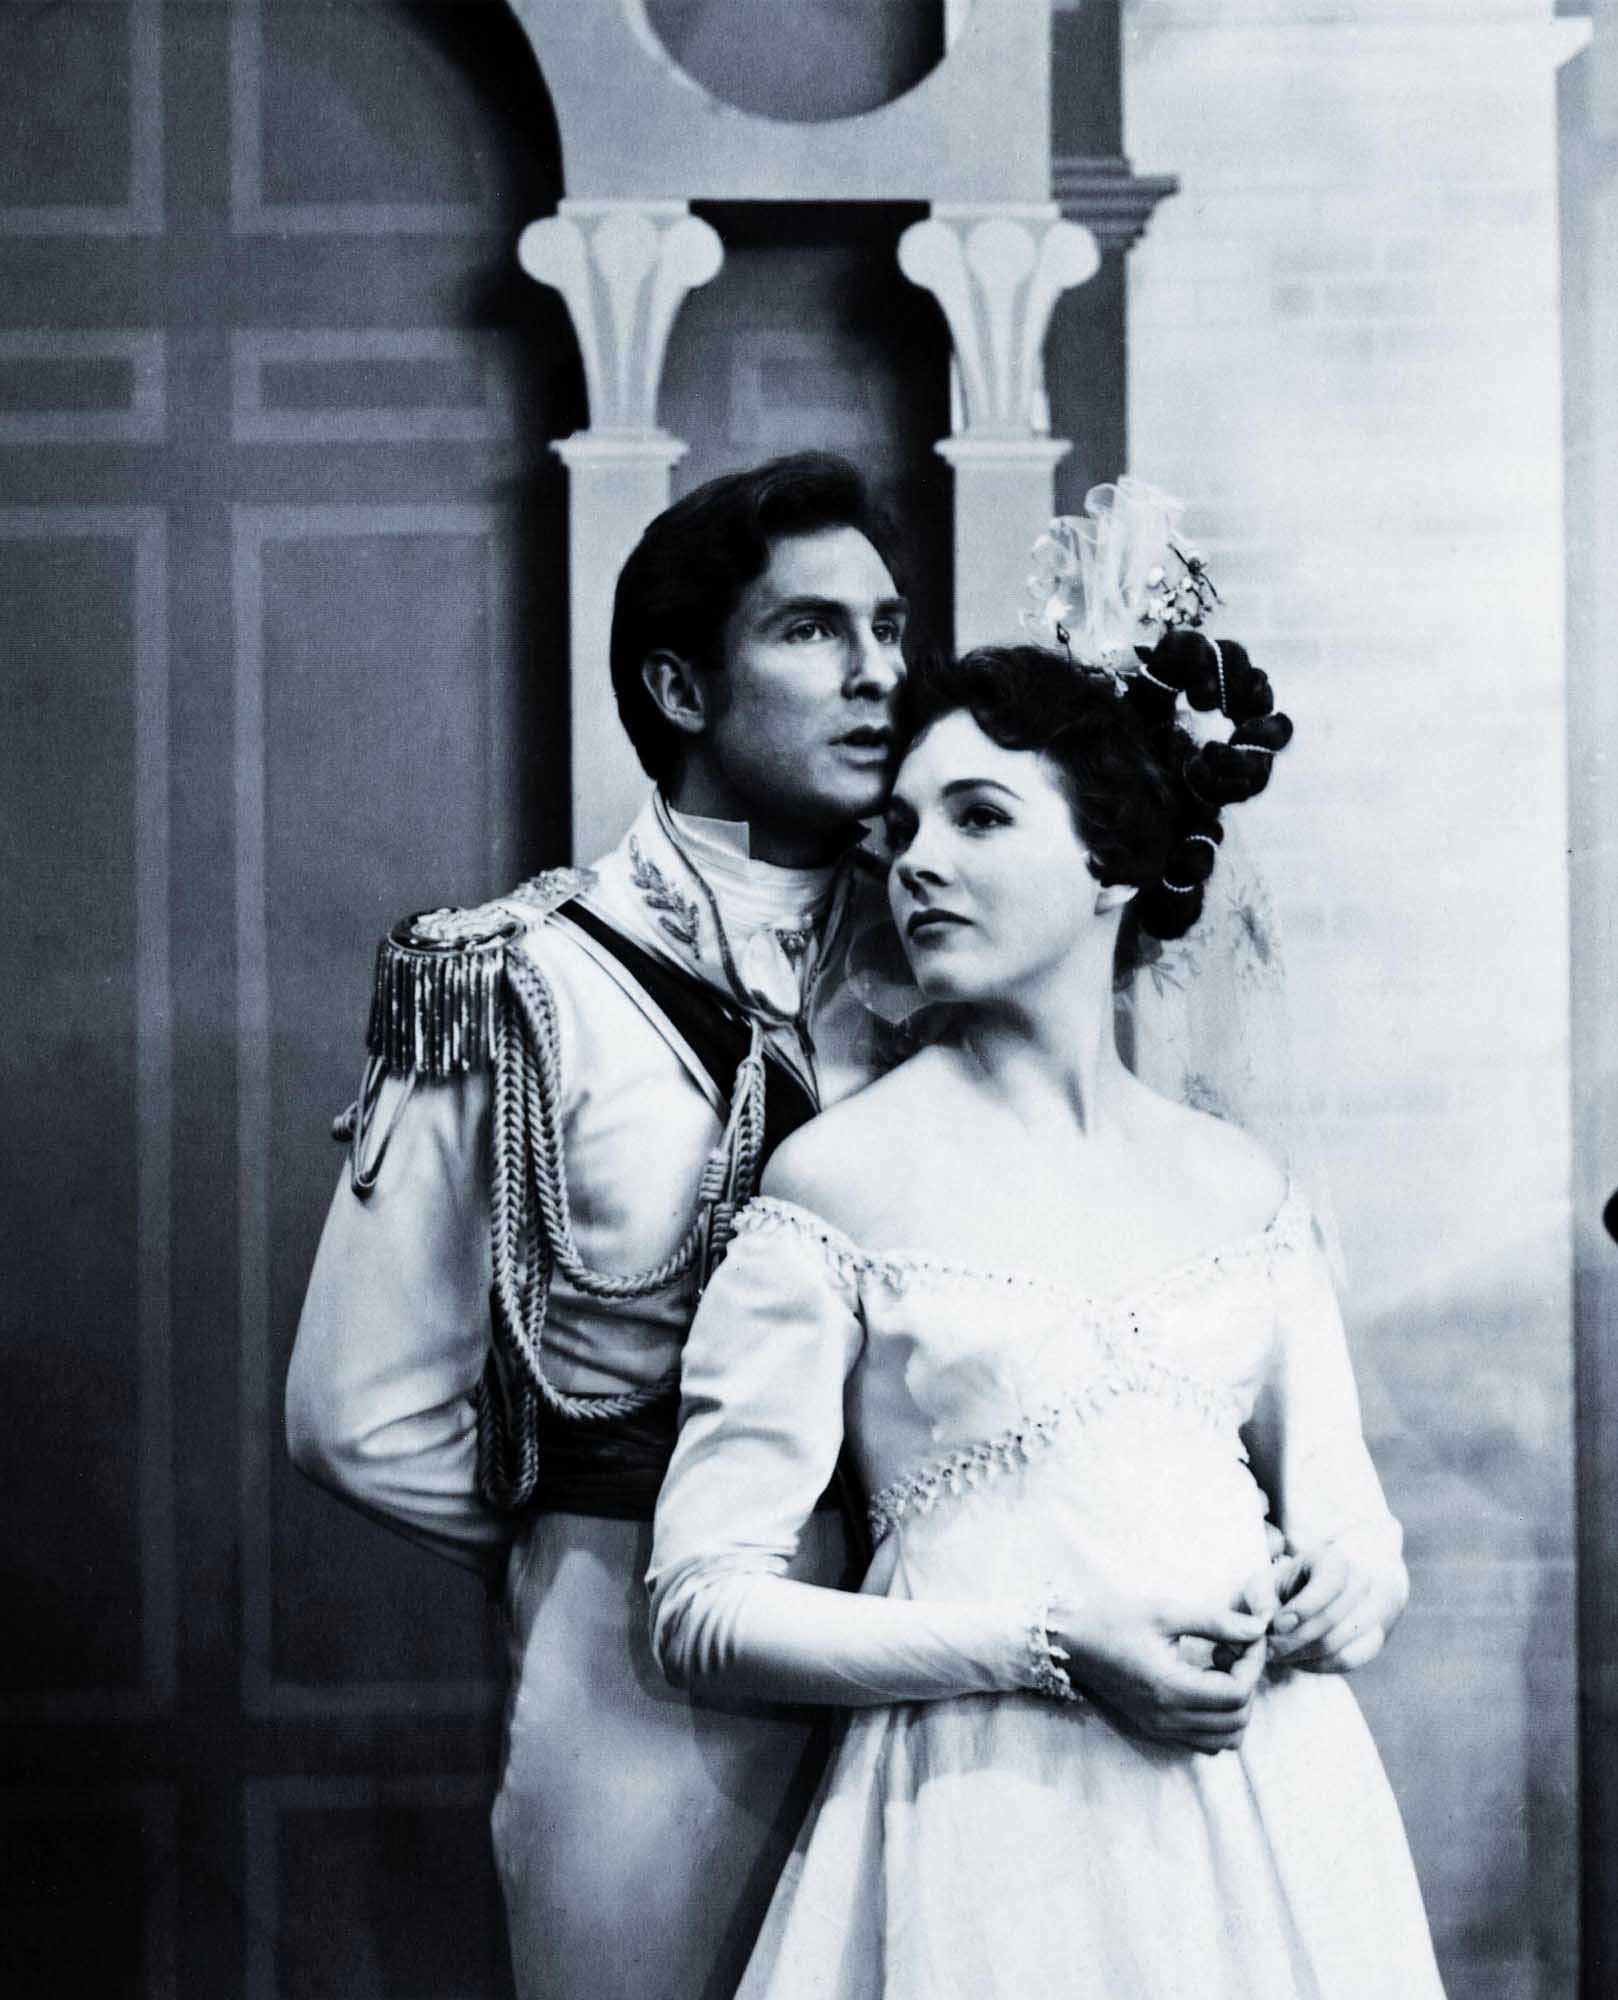 A rehearsal photo from the 1957 television broadcast of Cinderella.